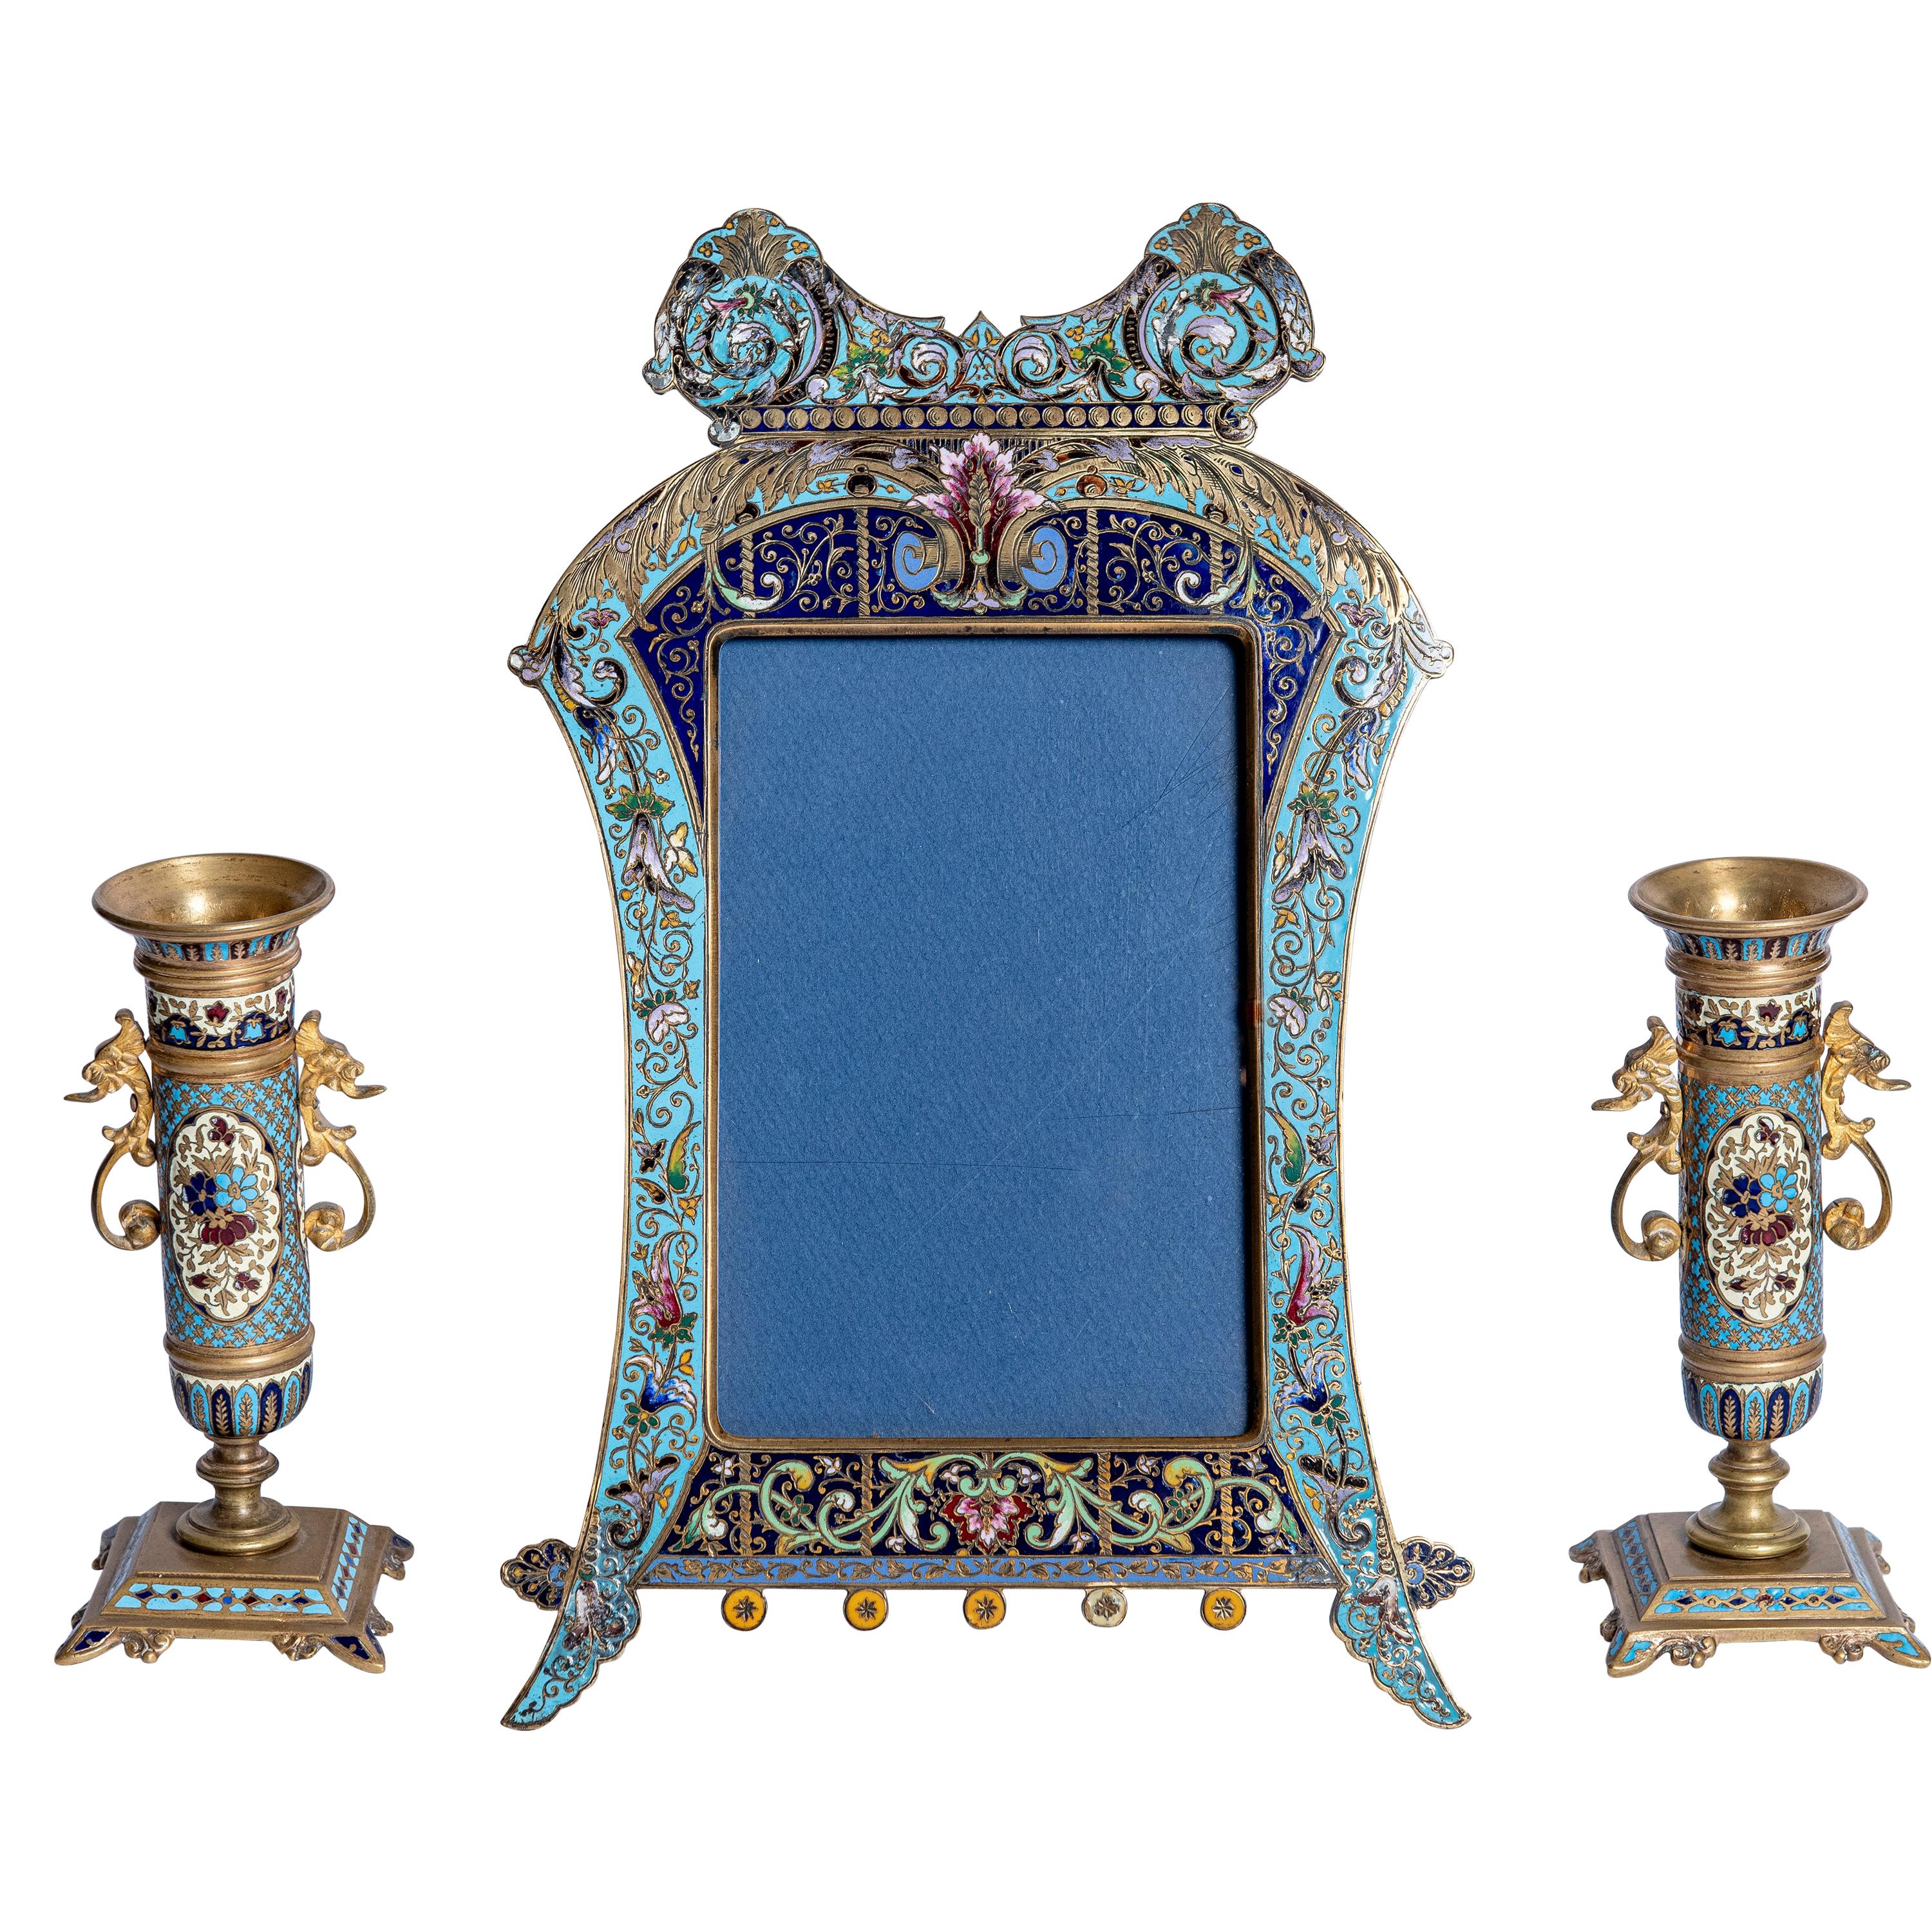 Set of a Pair of Closionne Candlesticks and a Picture Frame, France, circa 1890